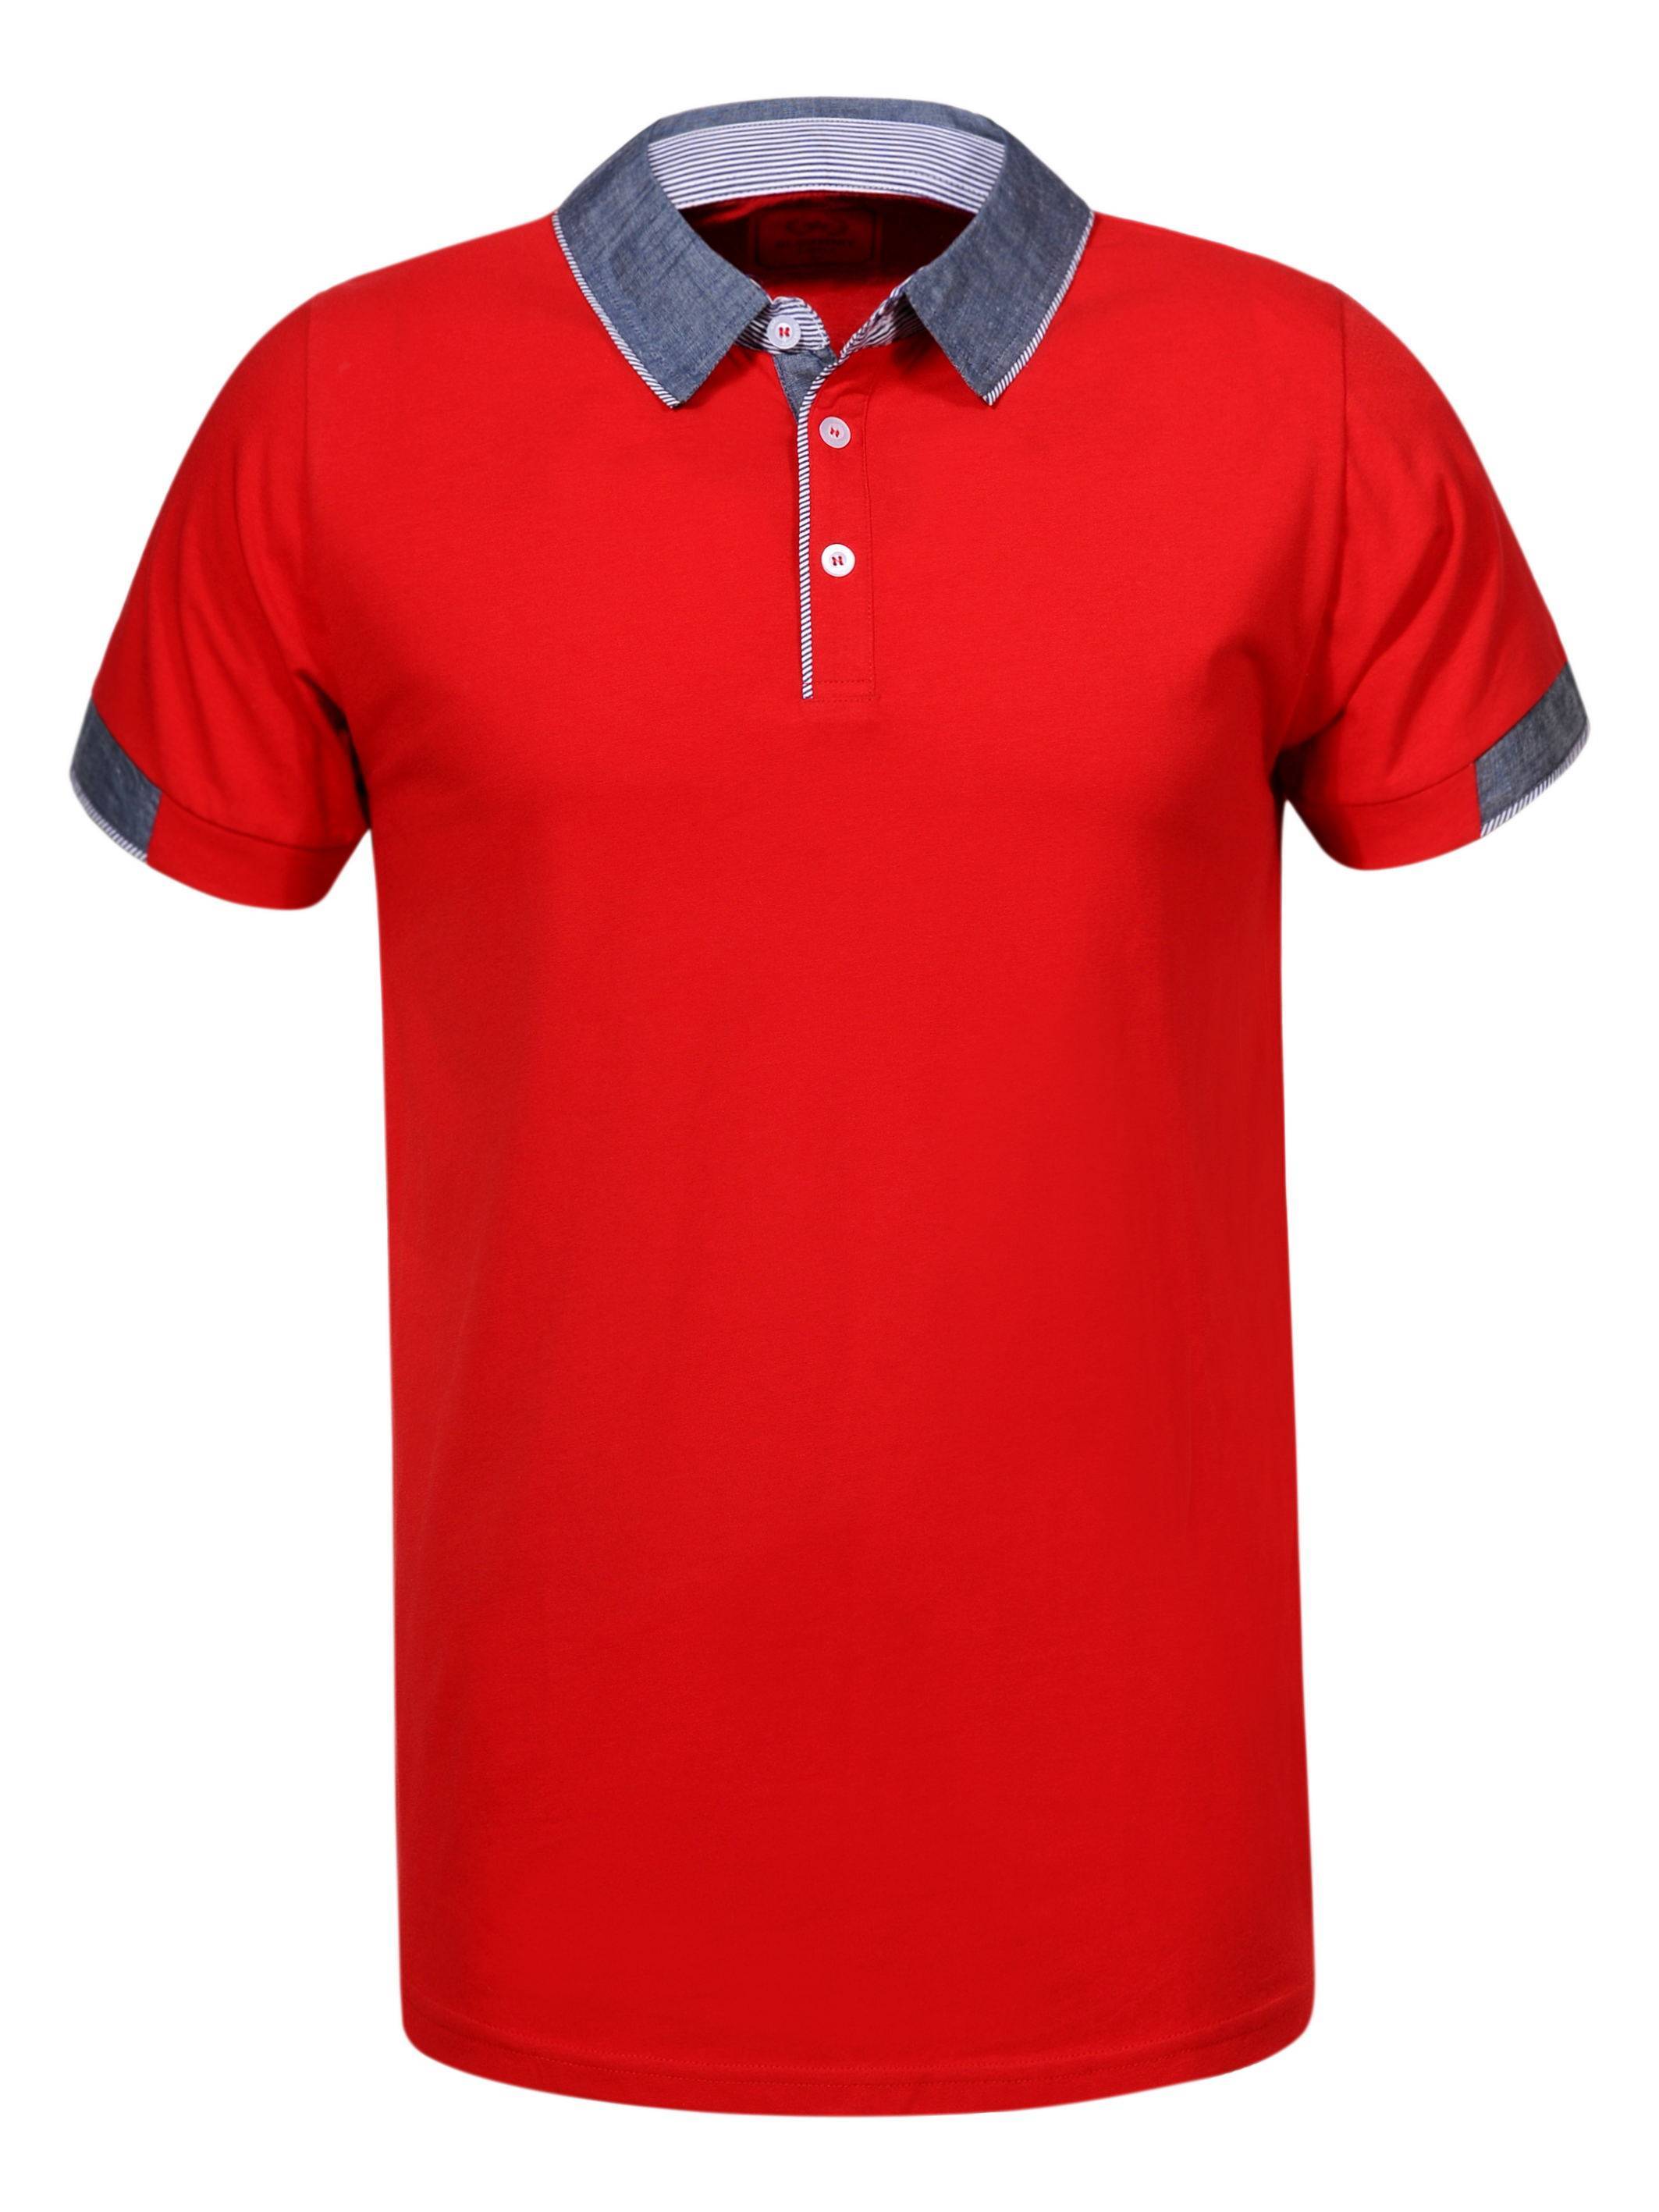 Plus size Men's Knitted Short Sleeve Polo Shirt